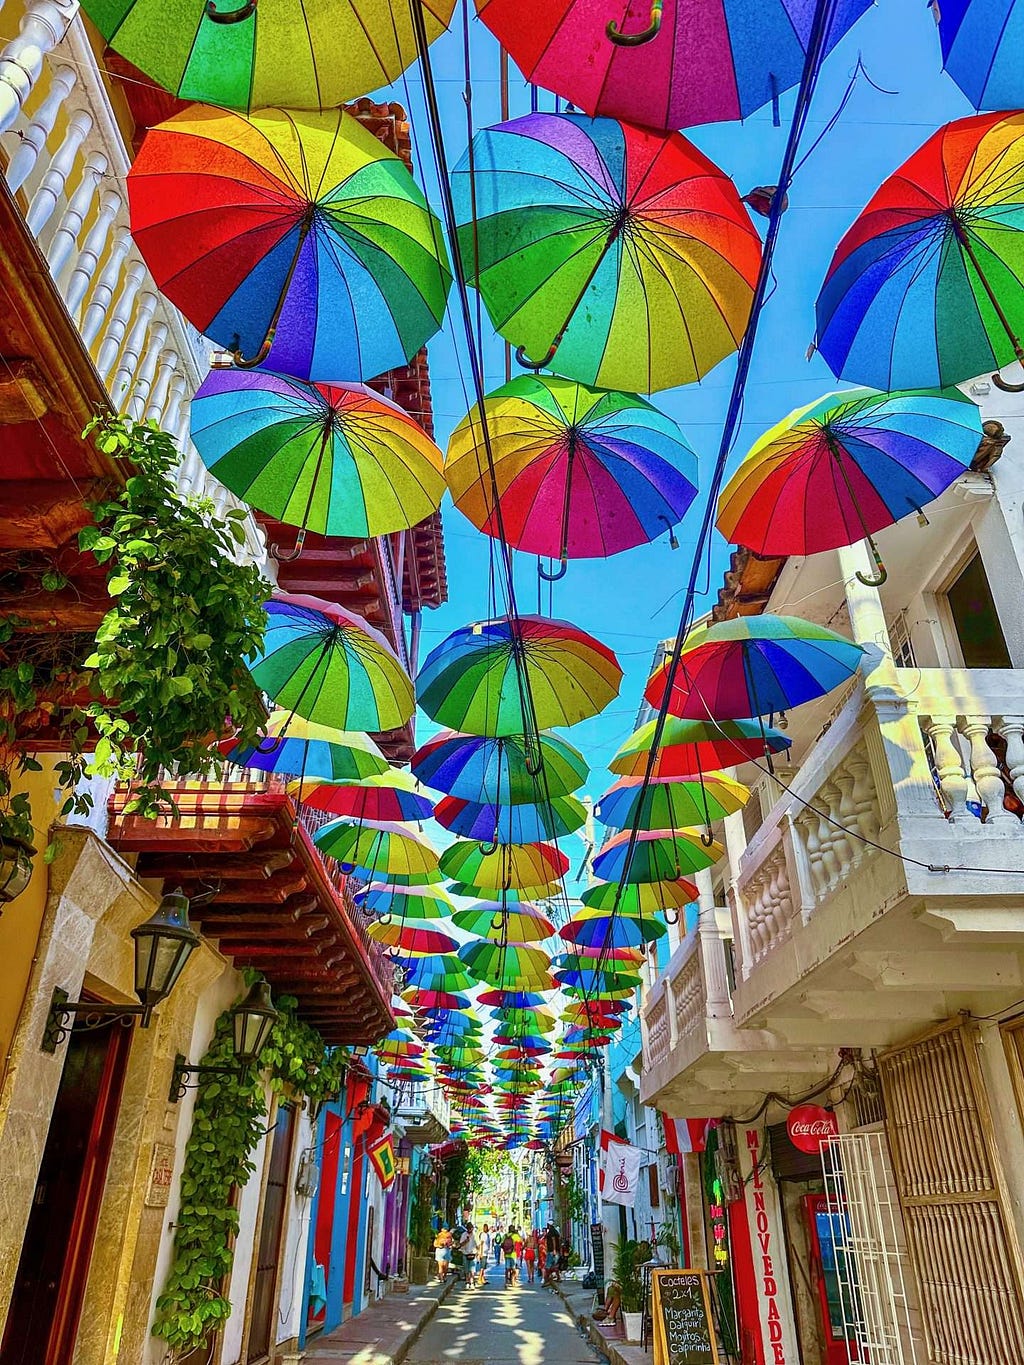 A narrow street in Cartagena, Colombia is adorned with colorful umbrellas suspended above, creating a canopy between the buildings. The blue sky is visible above the umbrellas, and greenery hangs from the balconies.